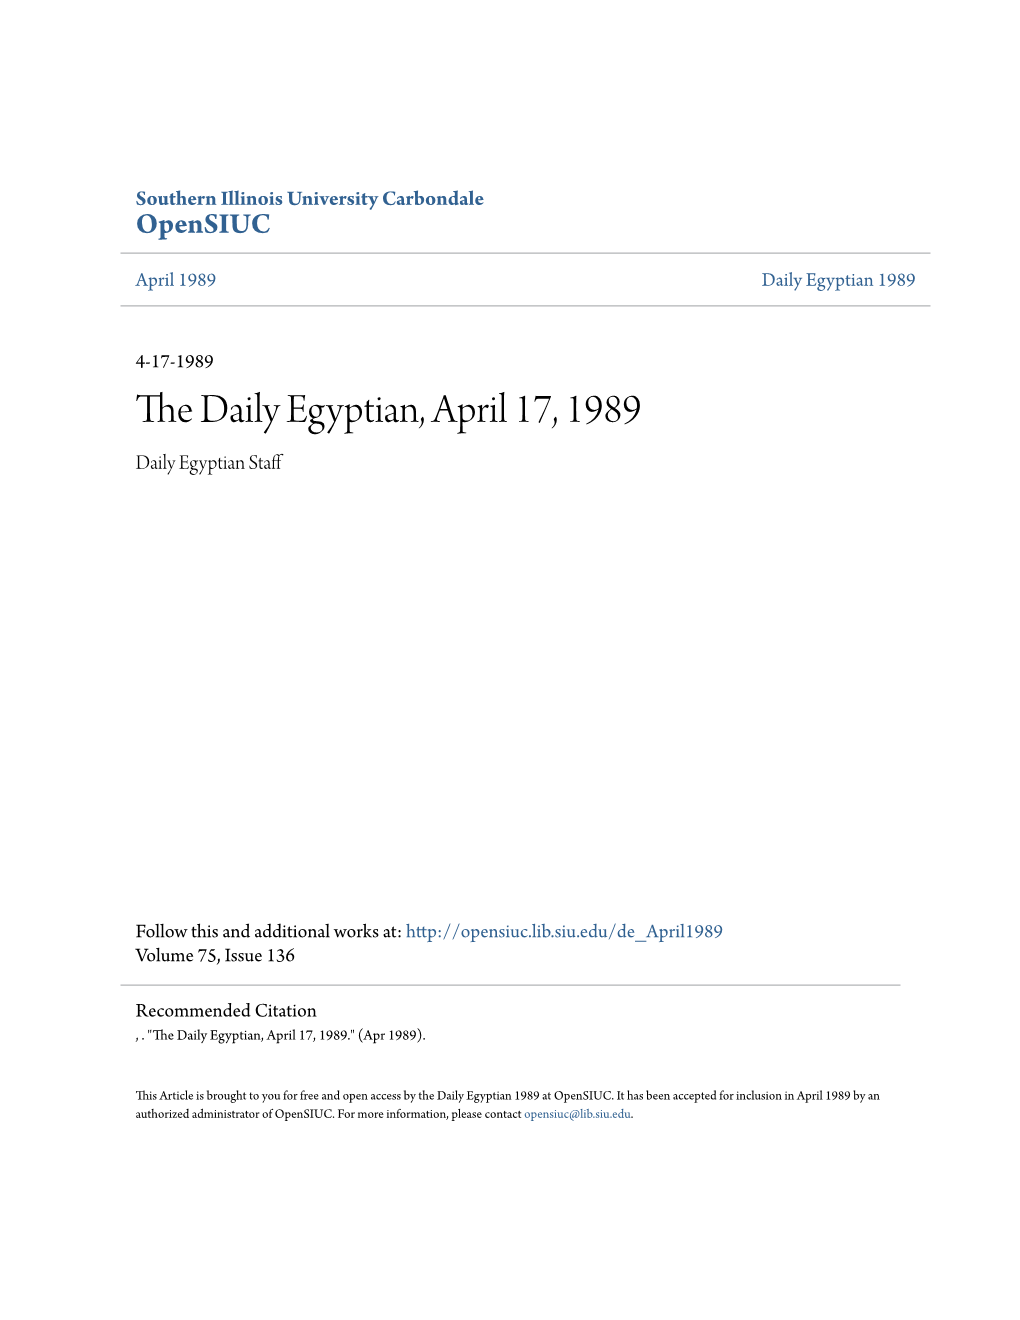 The Daily Egyptian, April 17, 1989